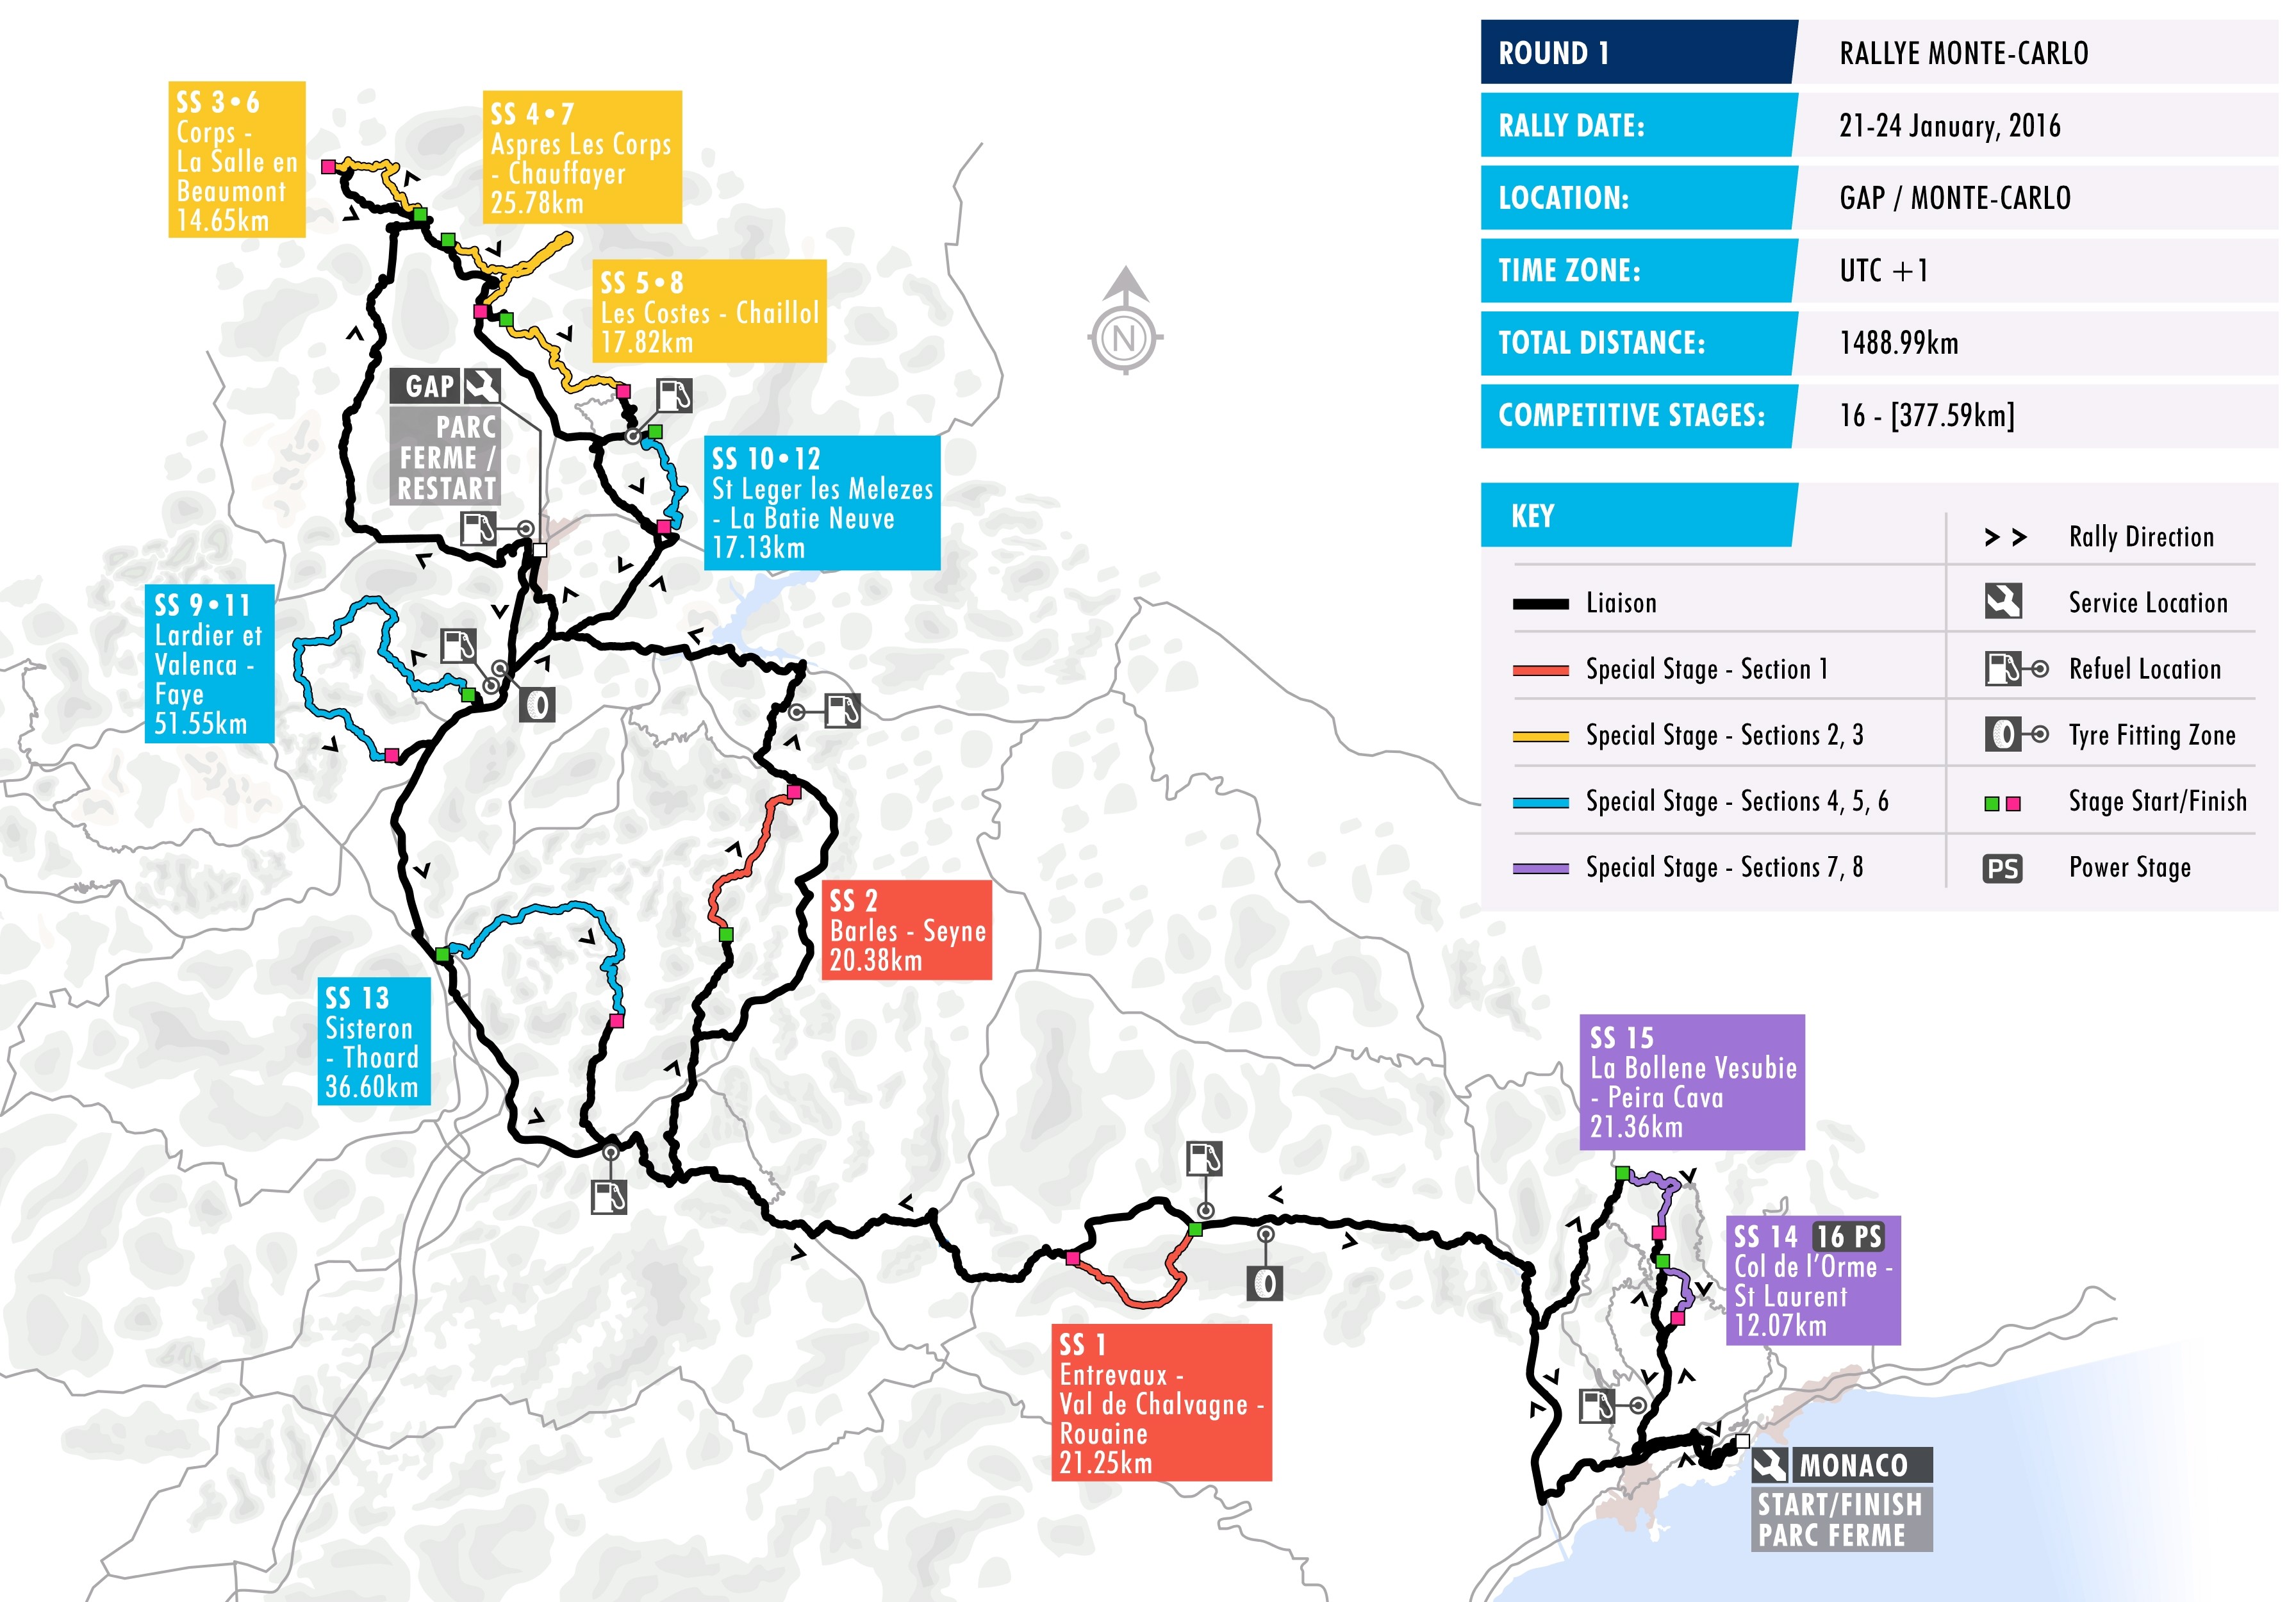 2016 Rallye Monte-Carlo - Stage Map